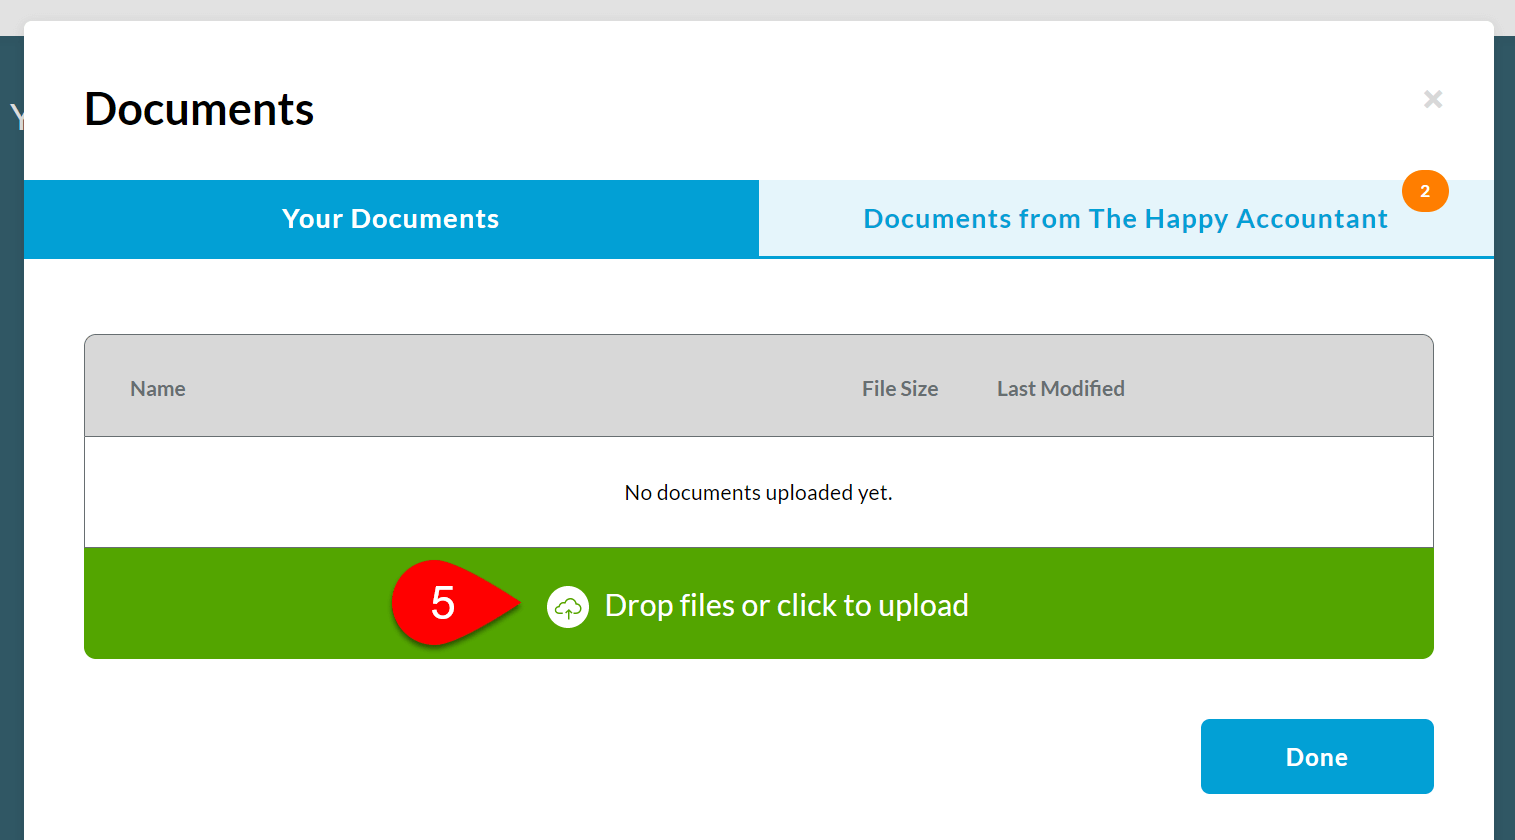 Screen Capture: Drop Files or Client to Upload